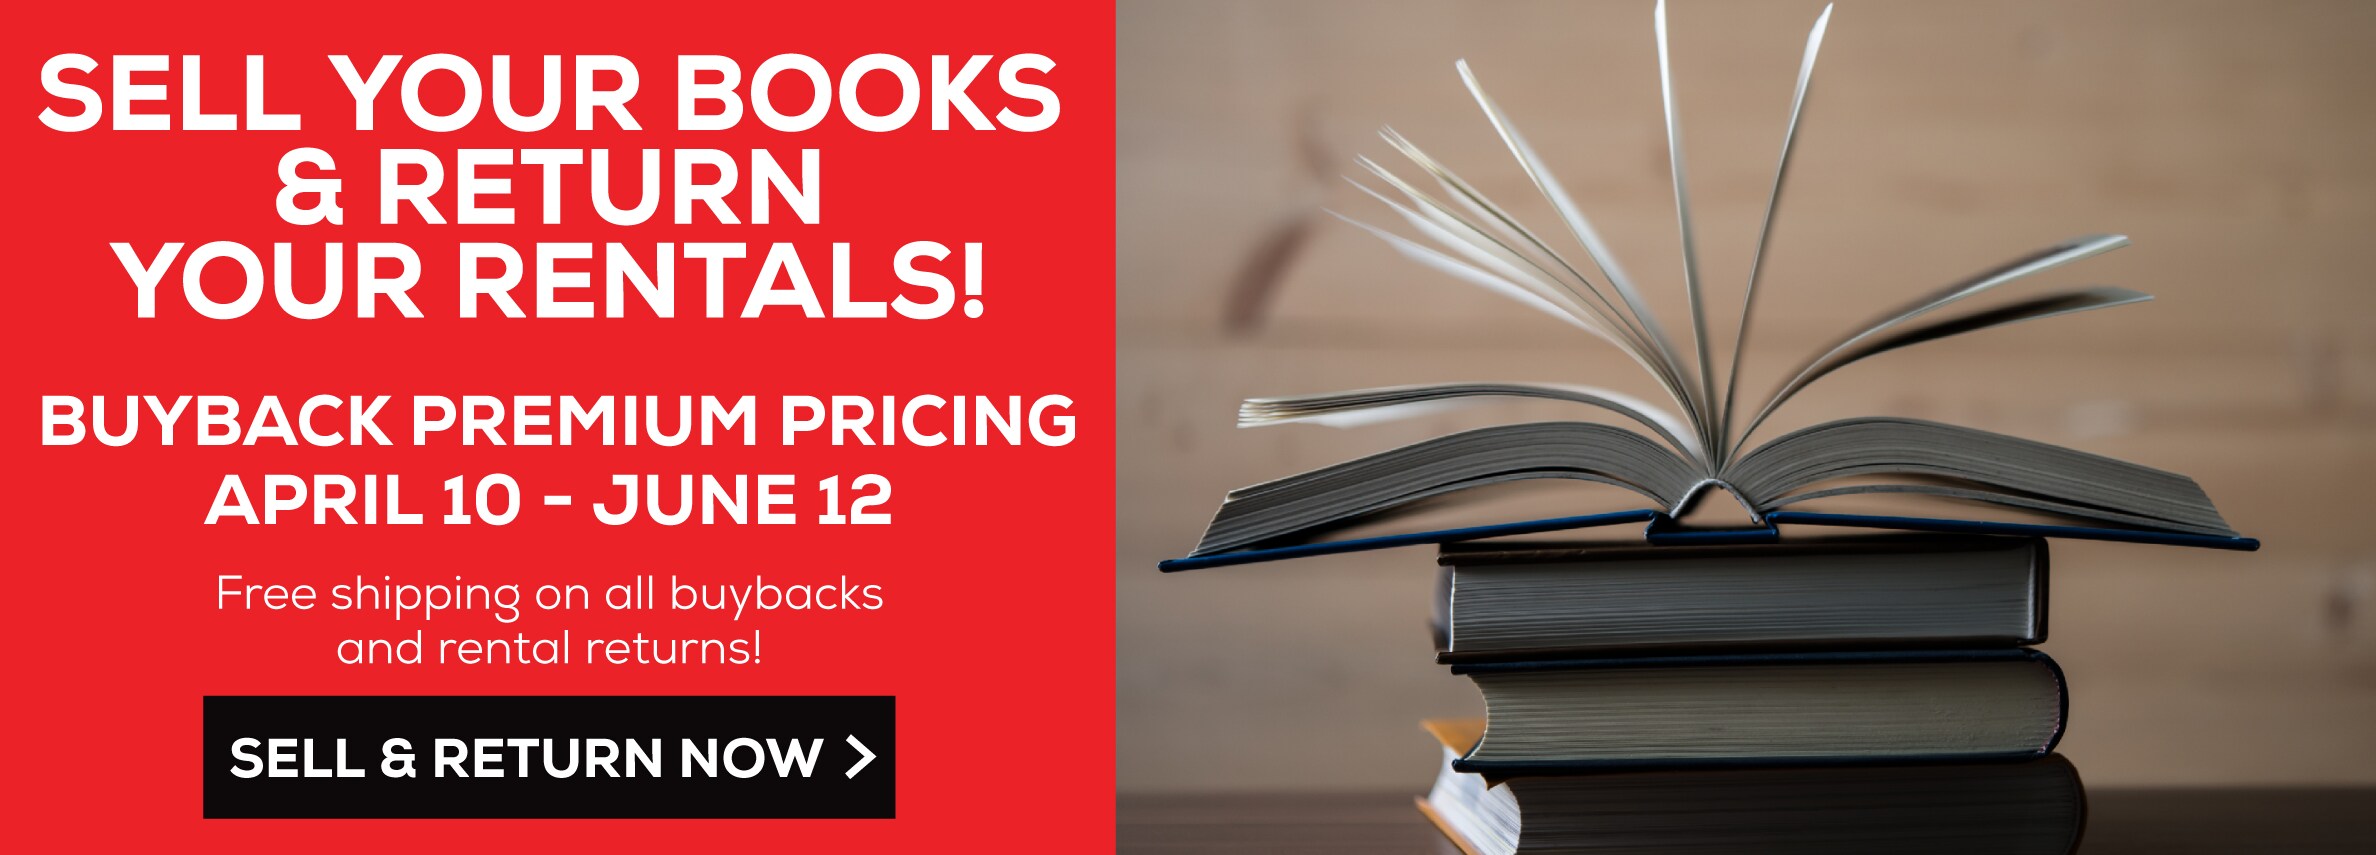 Sell your books and return your rentals! Buyback Premium pricing April 10 - June 12. Free shipping on all buybacks and rental returns! Sell and return now